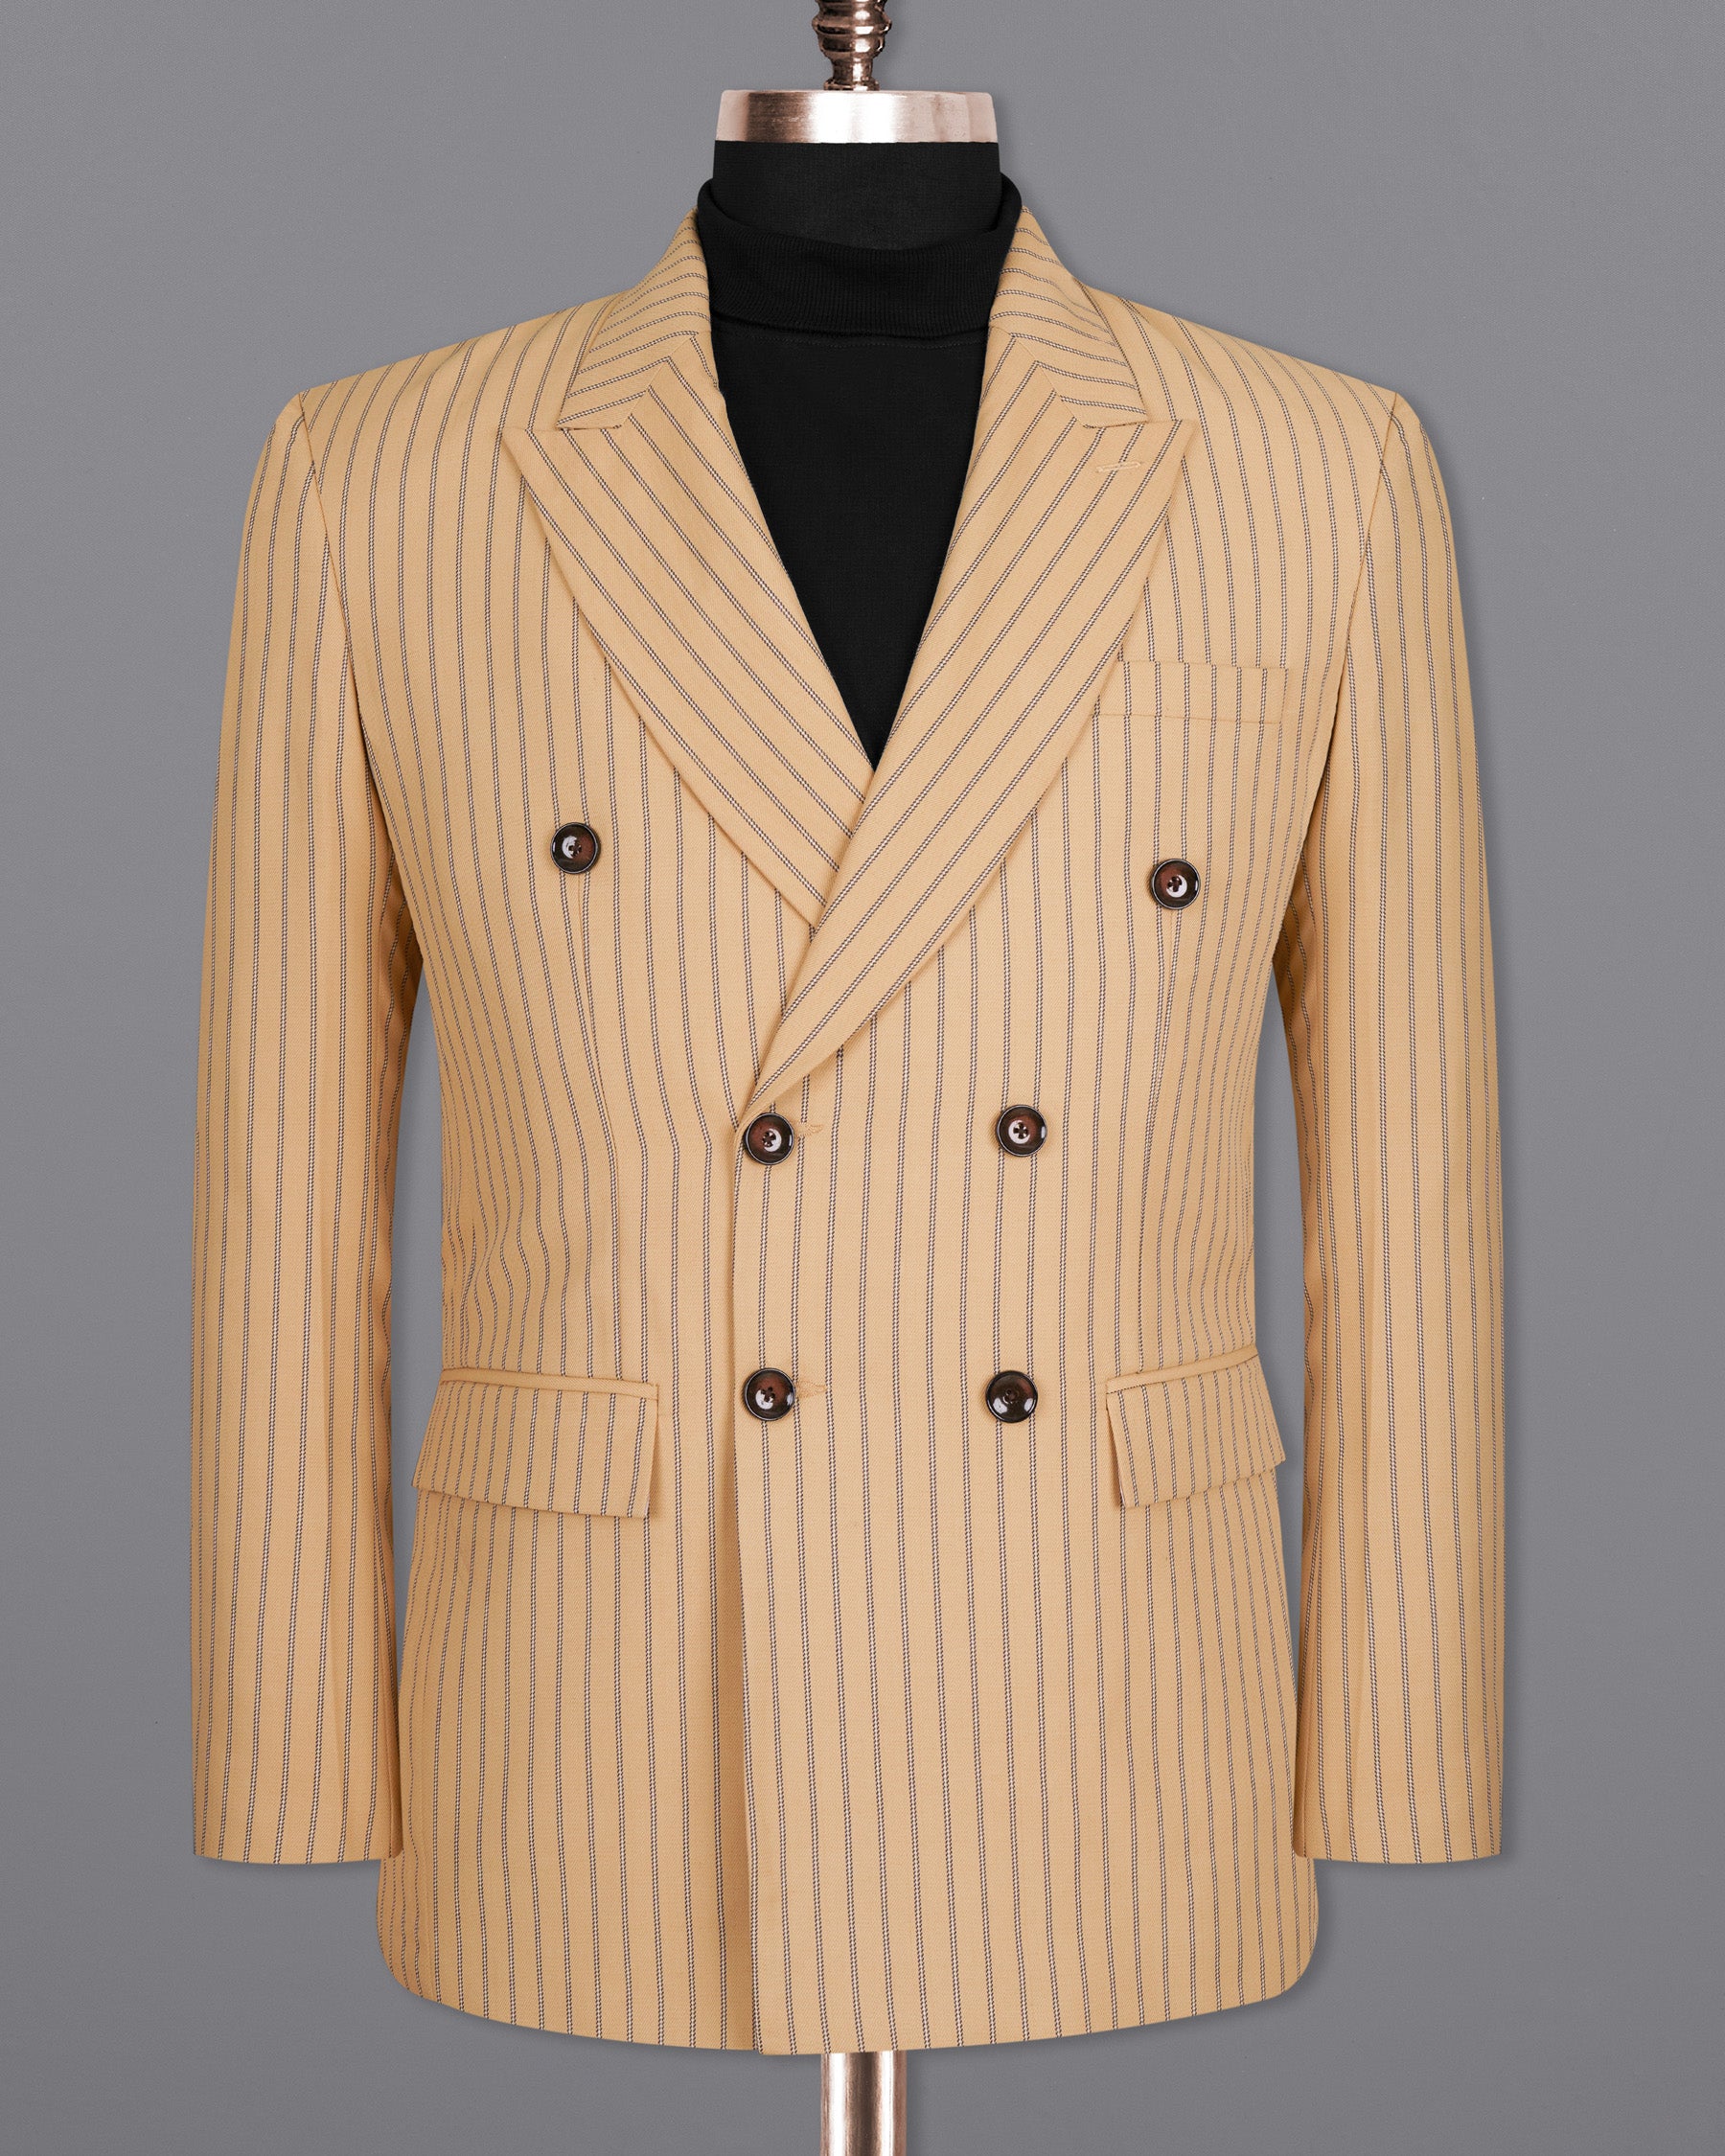 Harvest Gold Cream Striped Woolrich Double-breasted Blazer BL1518-DB-36, BL1518-DB-38, BL1518-DB-40, BL1518-DB-42, BL1518-DB-44, BL1518-DB-46, BL1518-DB-48, BL1518-DB-50, BL1518-DB-52, BL1518-DB-54, BL1518-DB-56, BL1518-DB-58, BL1518-DB-60